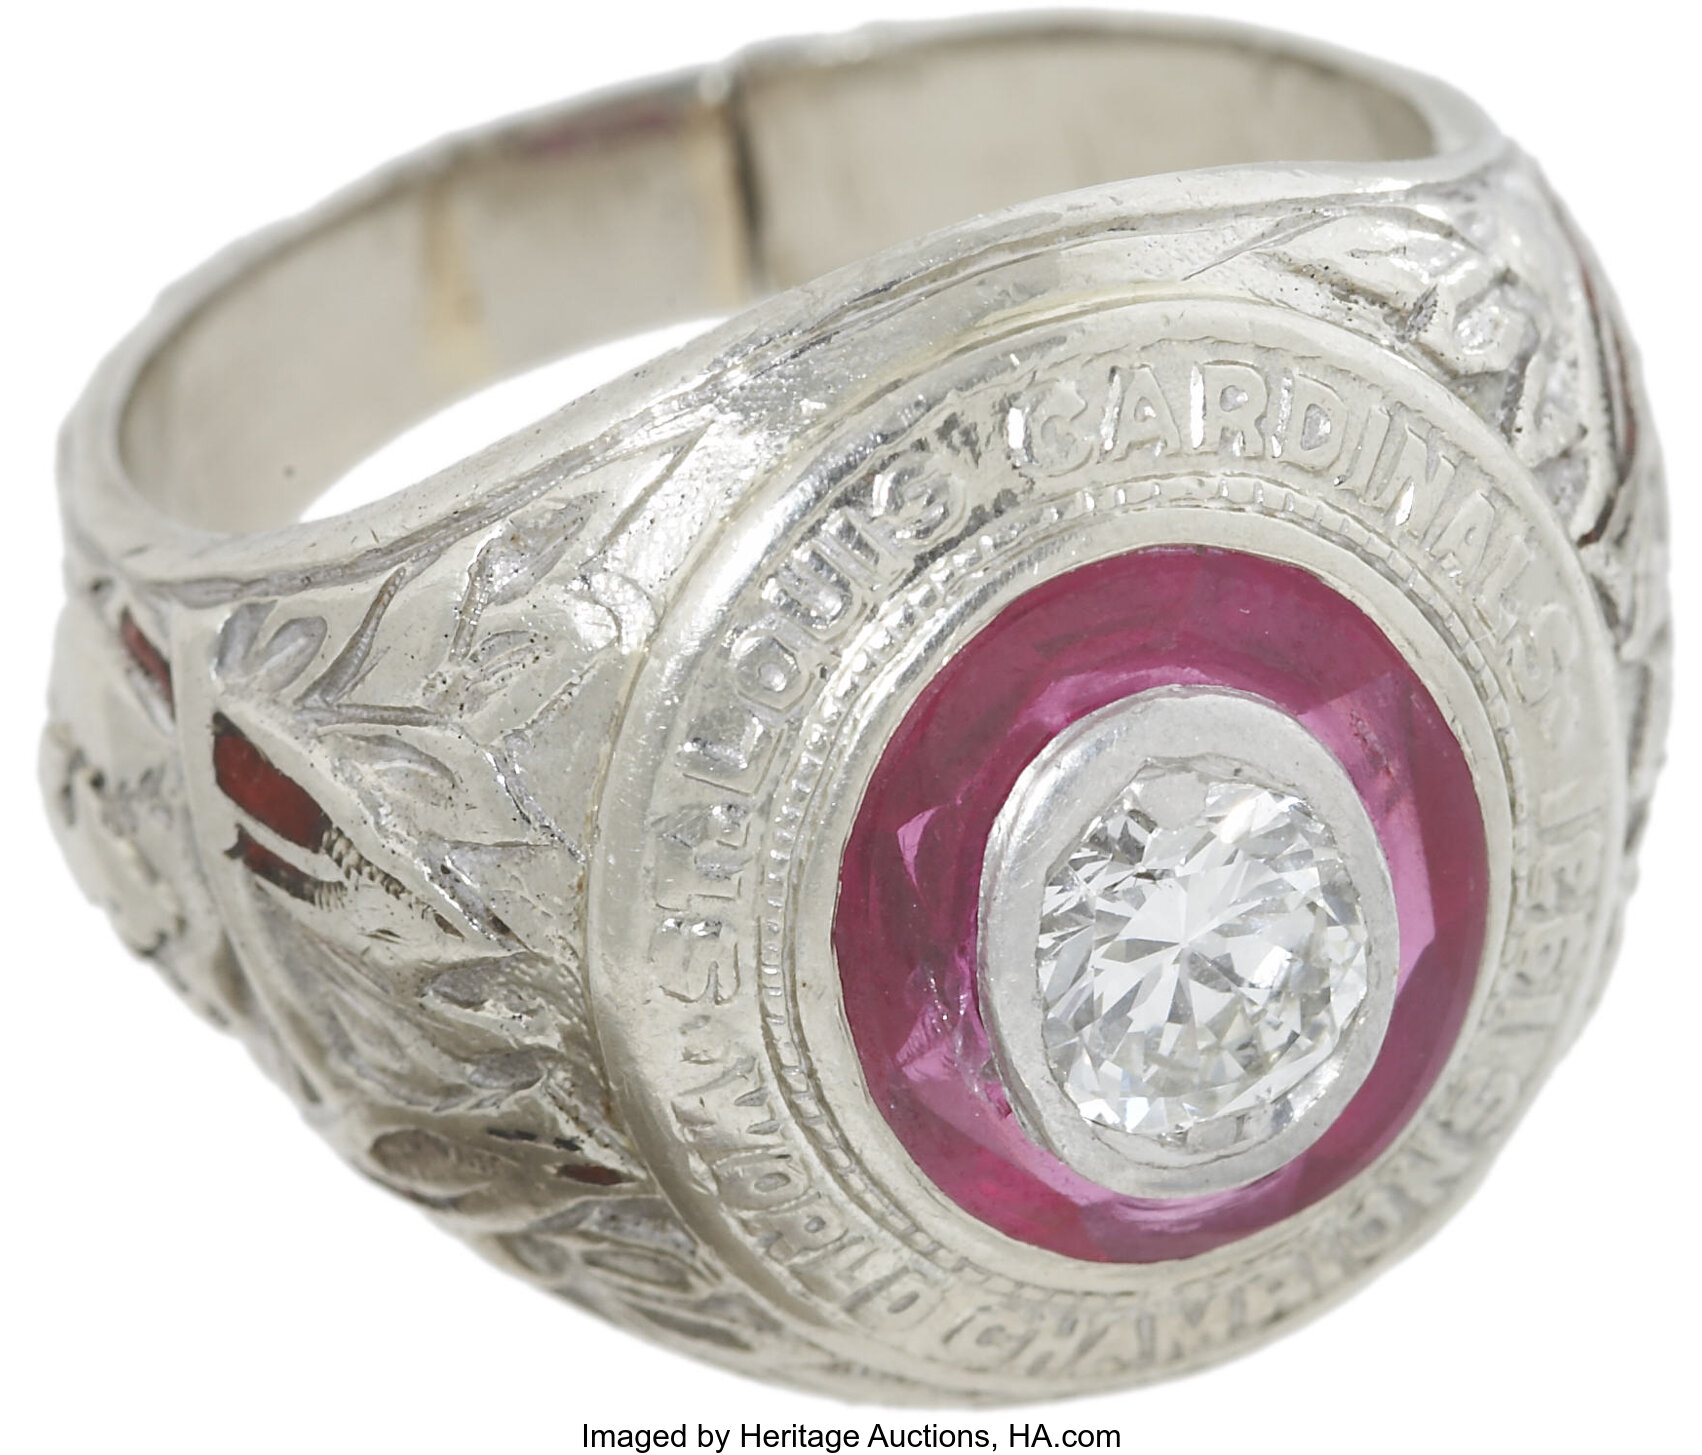 Sold at Auction: 1934 ST. LOUIS CARDINALS - MLB CHAMPIONSHIP RING